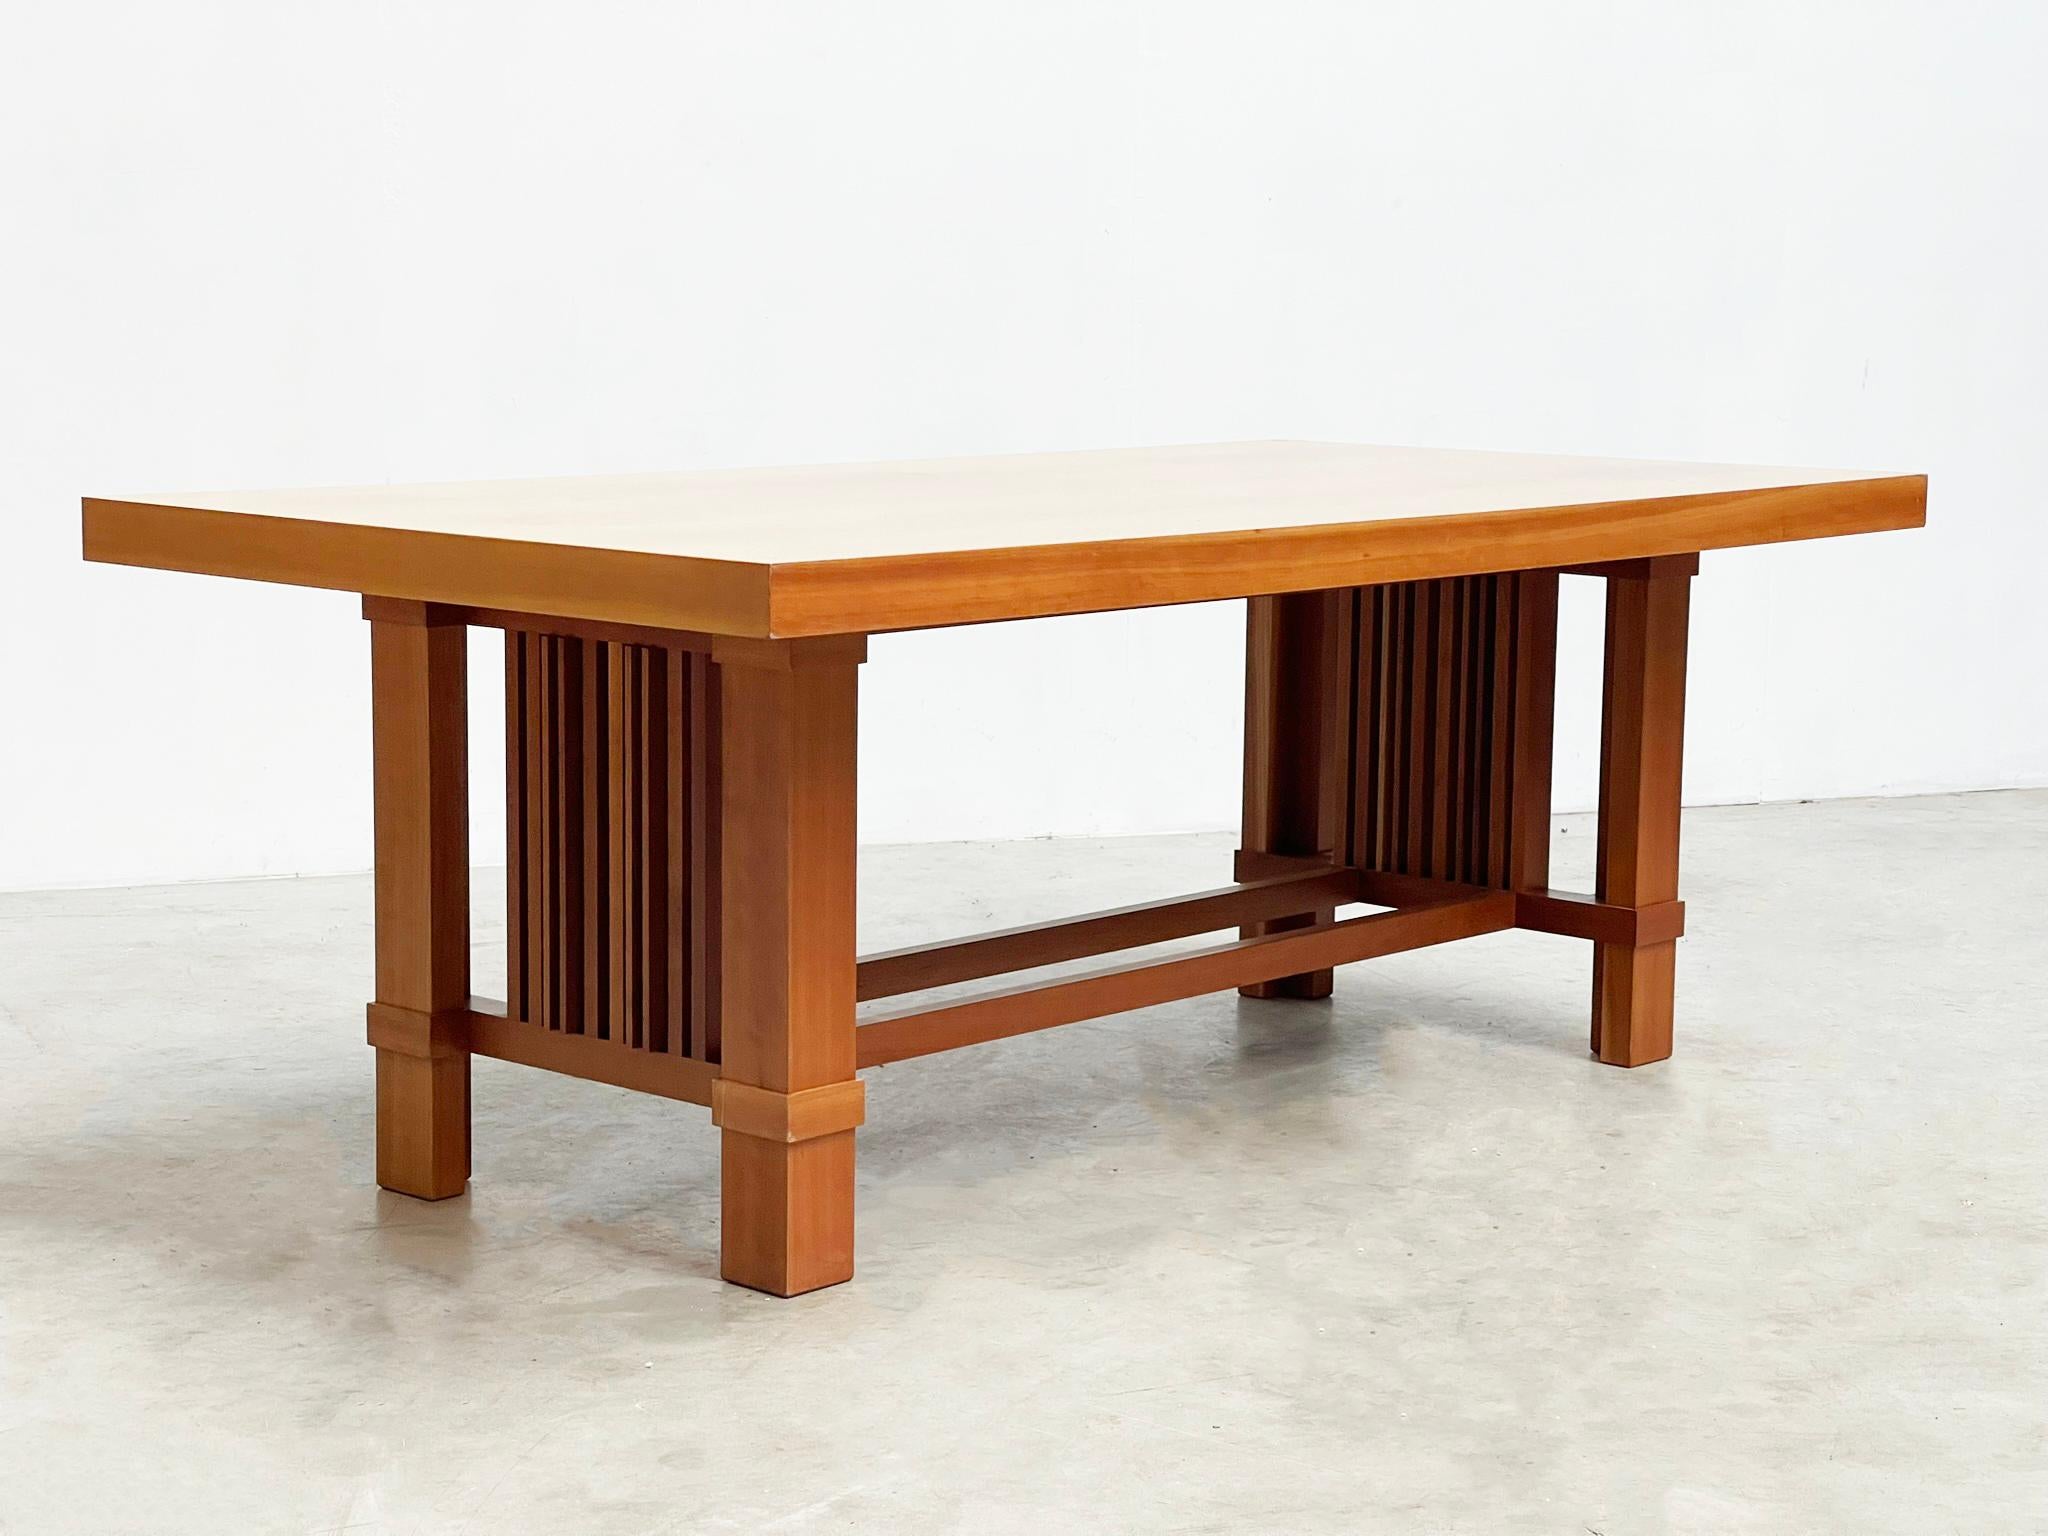 Wood Frank Lloyd Wright “608 Taliesin” Dining Table signed by Cassina, 1986 For Sale